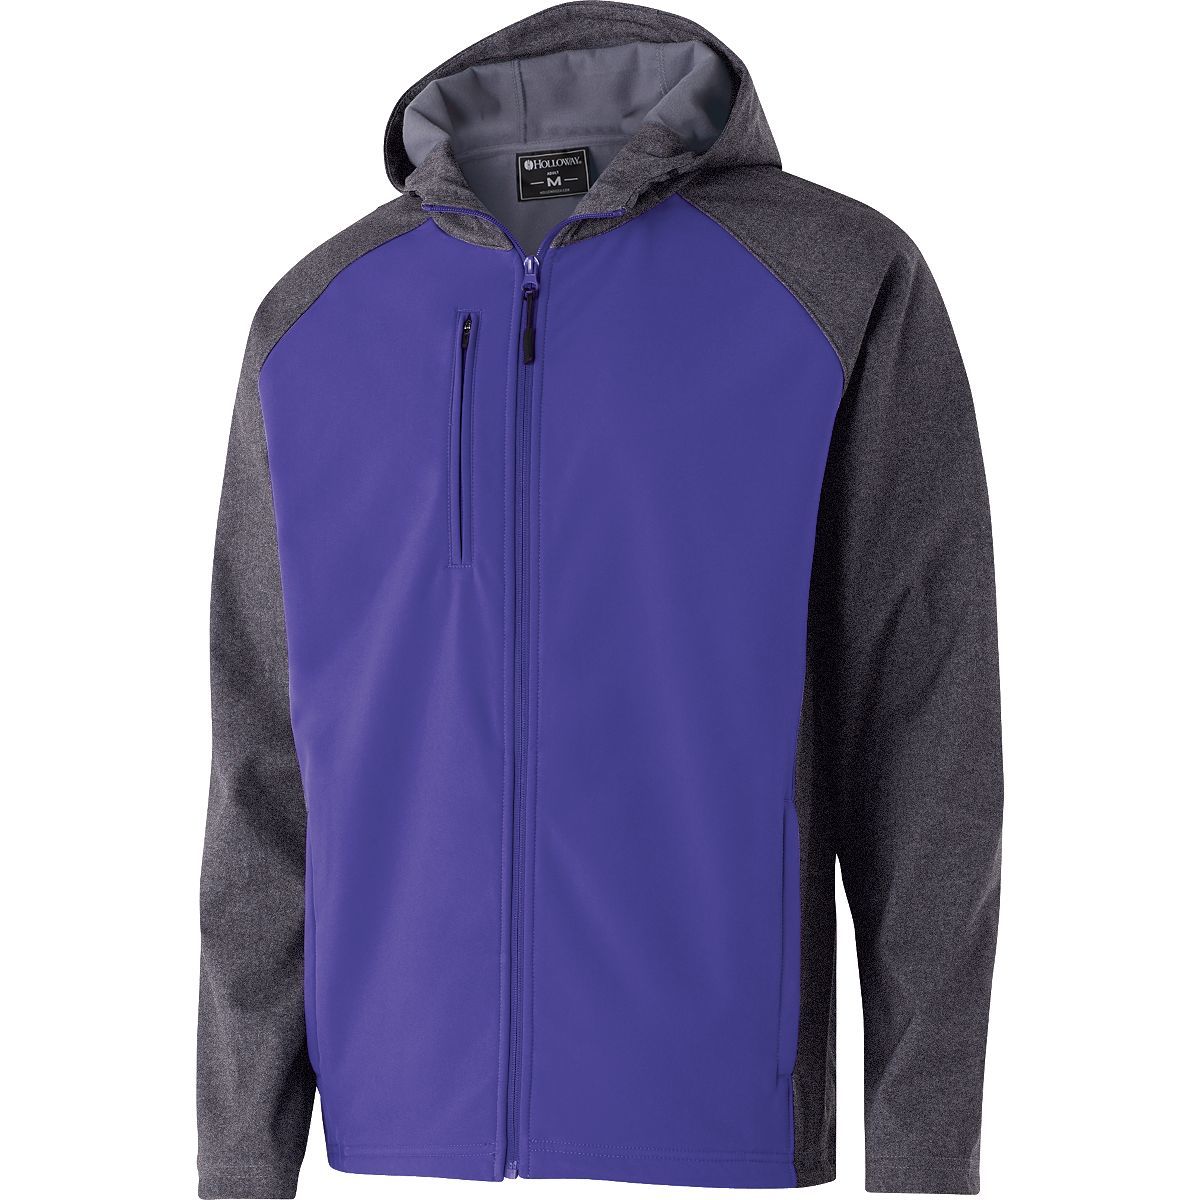 Holloway Raider Softshell Jacket in Carbon Print/Purple  -Part of the Adult, Adult-Jacket, Holloway, Outerwear product lines at KanaleyCreations.com